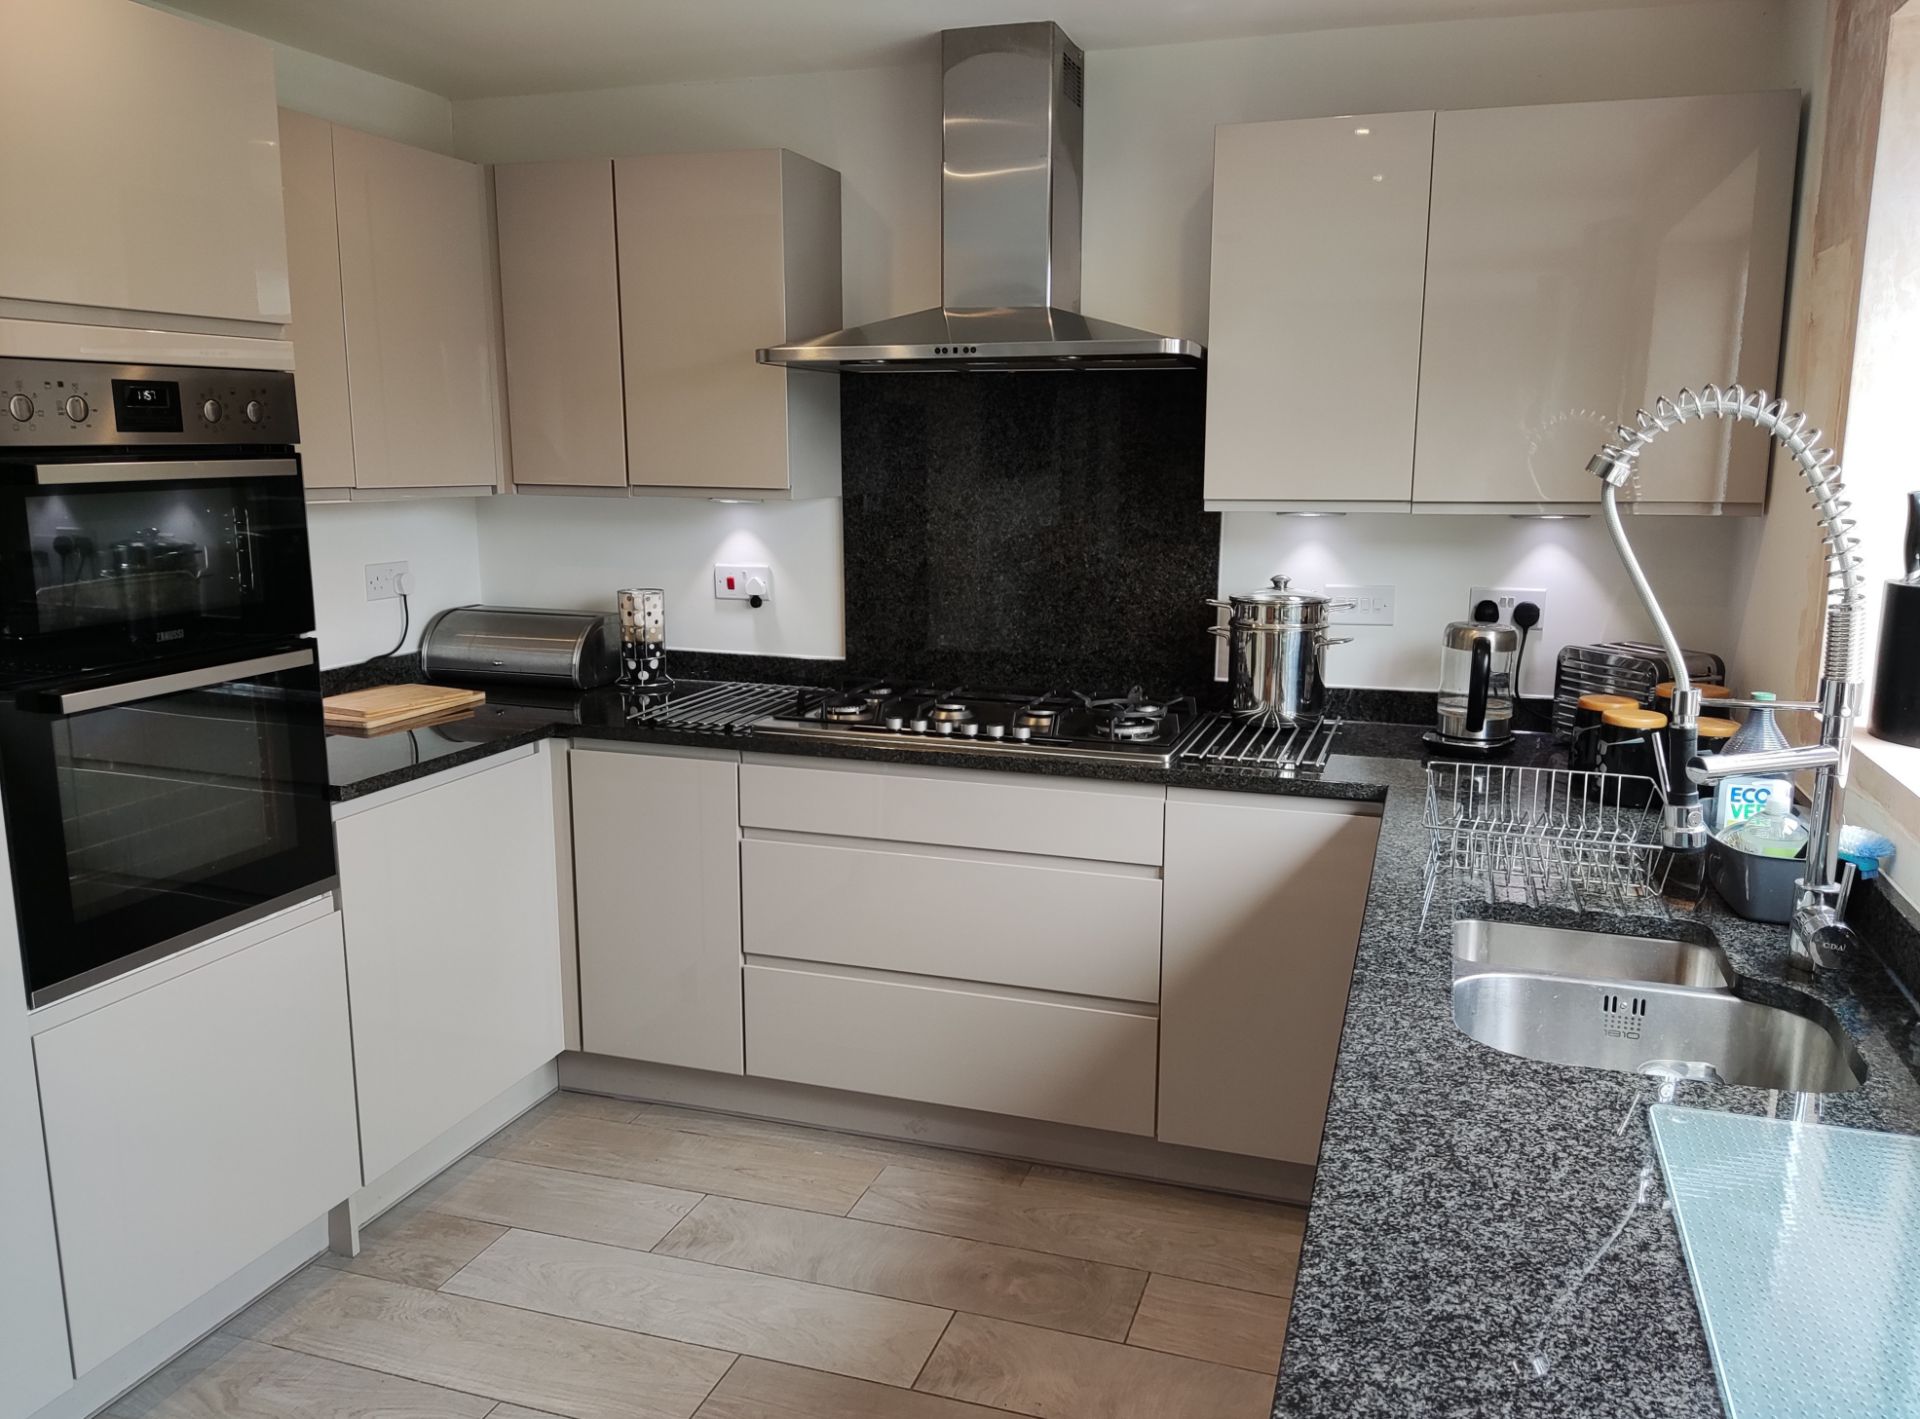 1 x Modern Handleless Kitchen Featuring Granite Worktops, A Double Oven, And Under-lighting - NO VAT - Image 44 of 56